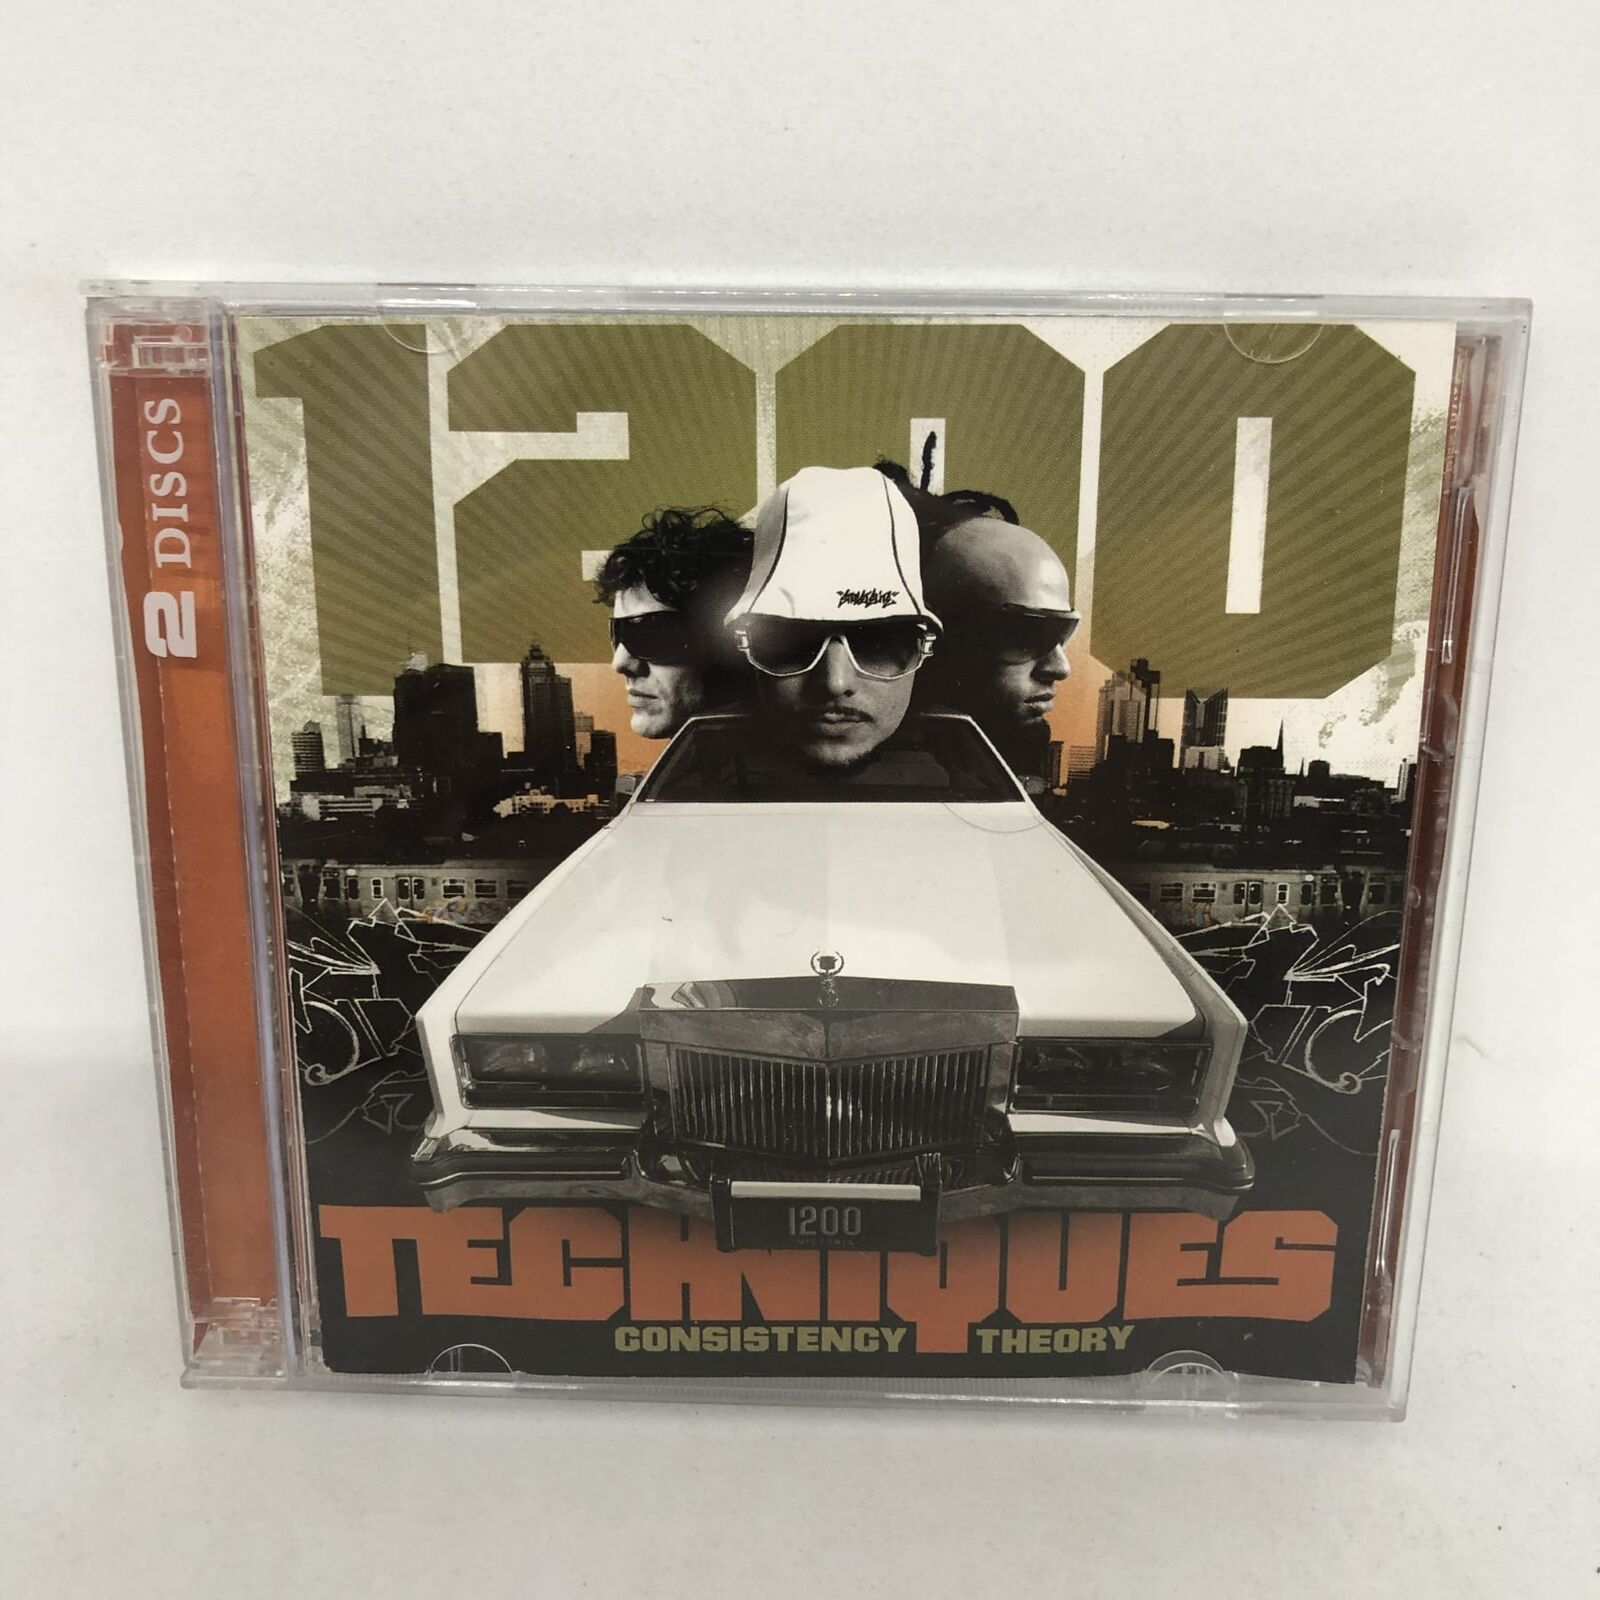 1200 Techniques CONSISTENCY THEORY (Deluxe w/ DVD) CD ACCEPTABLE CONDITION